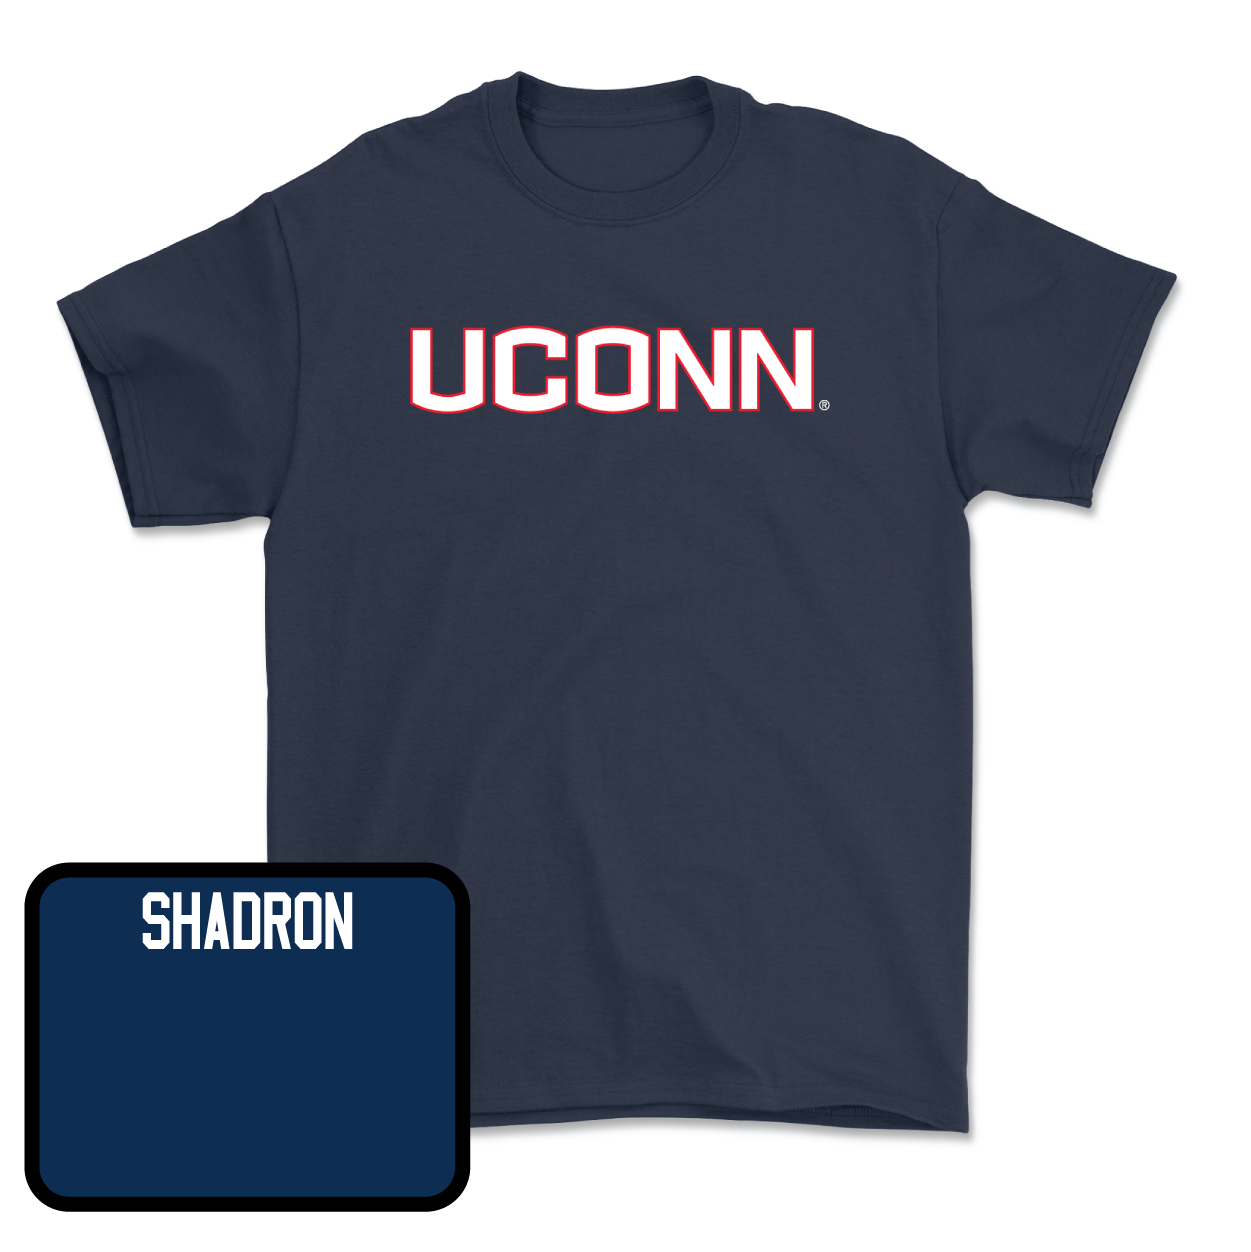 Navy Women's Rowing UConn Tee Youth Small / Genevieve Shadron